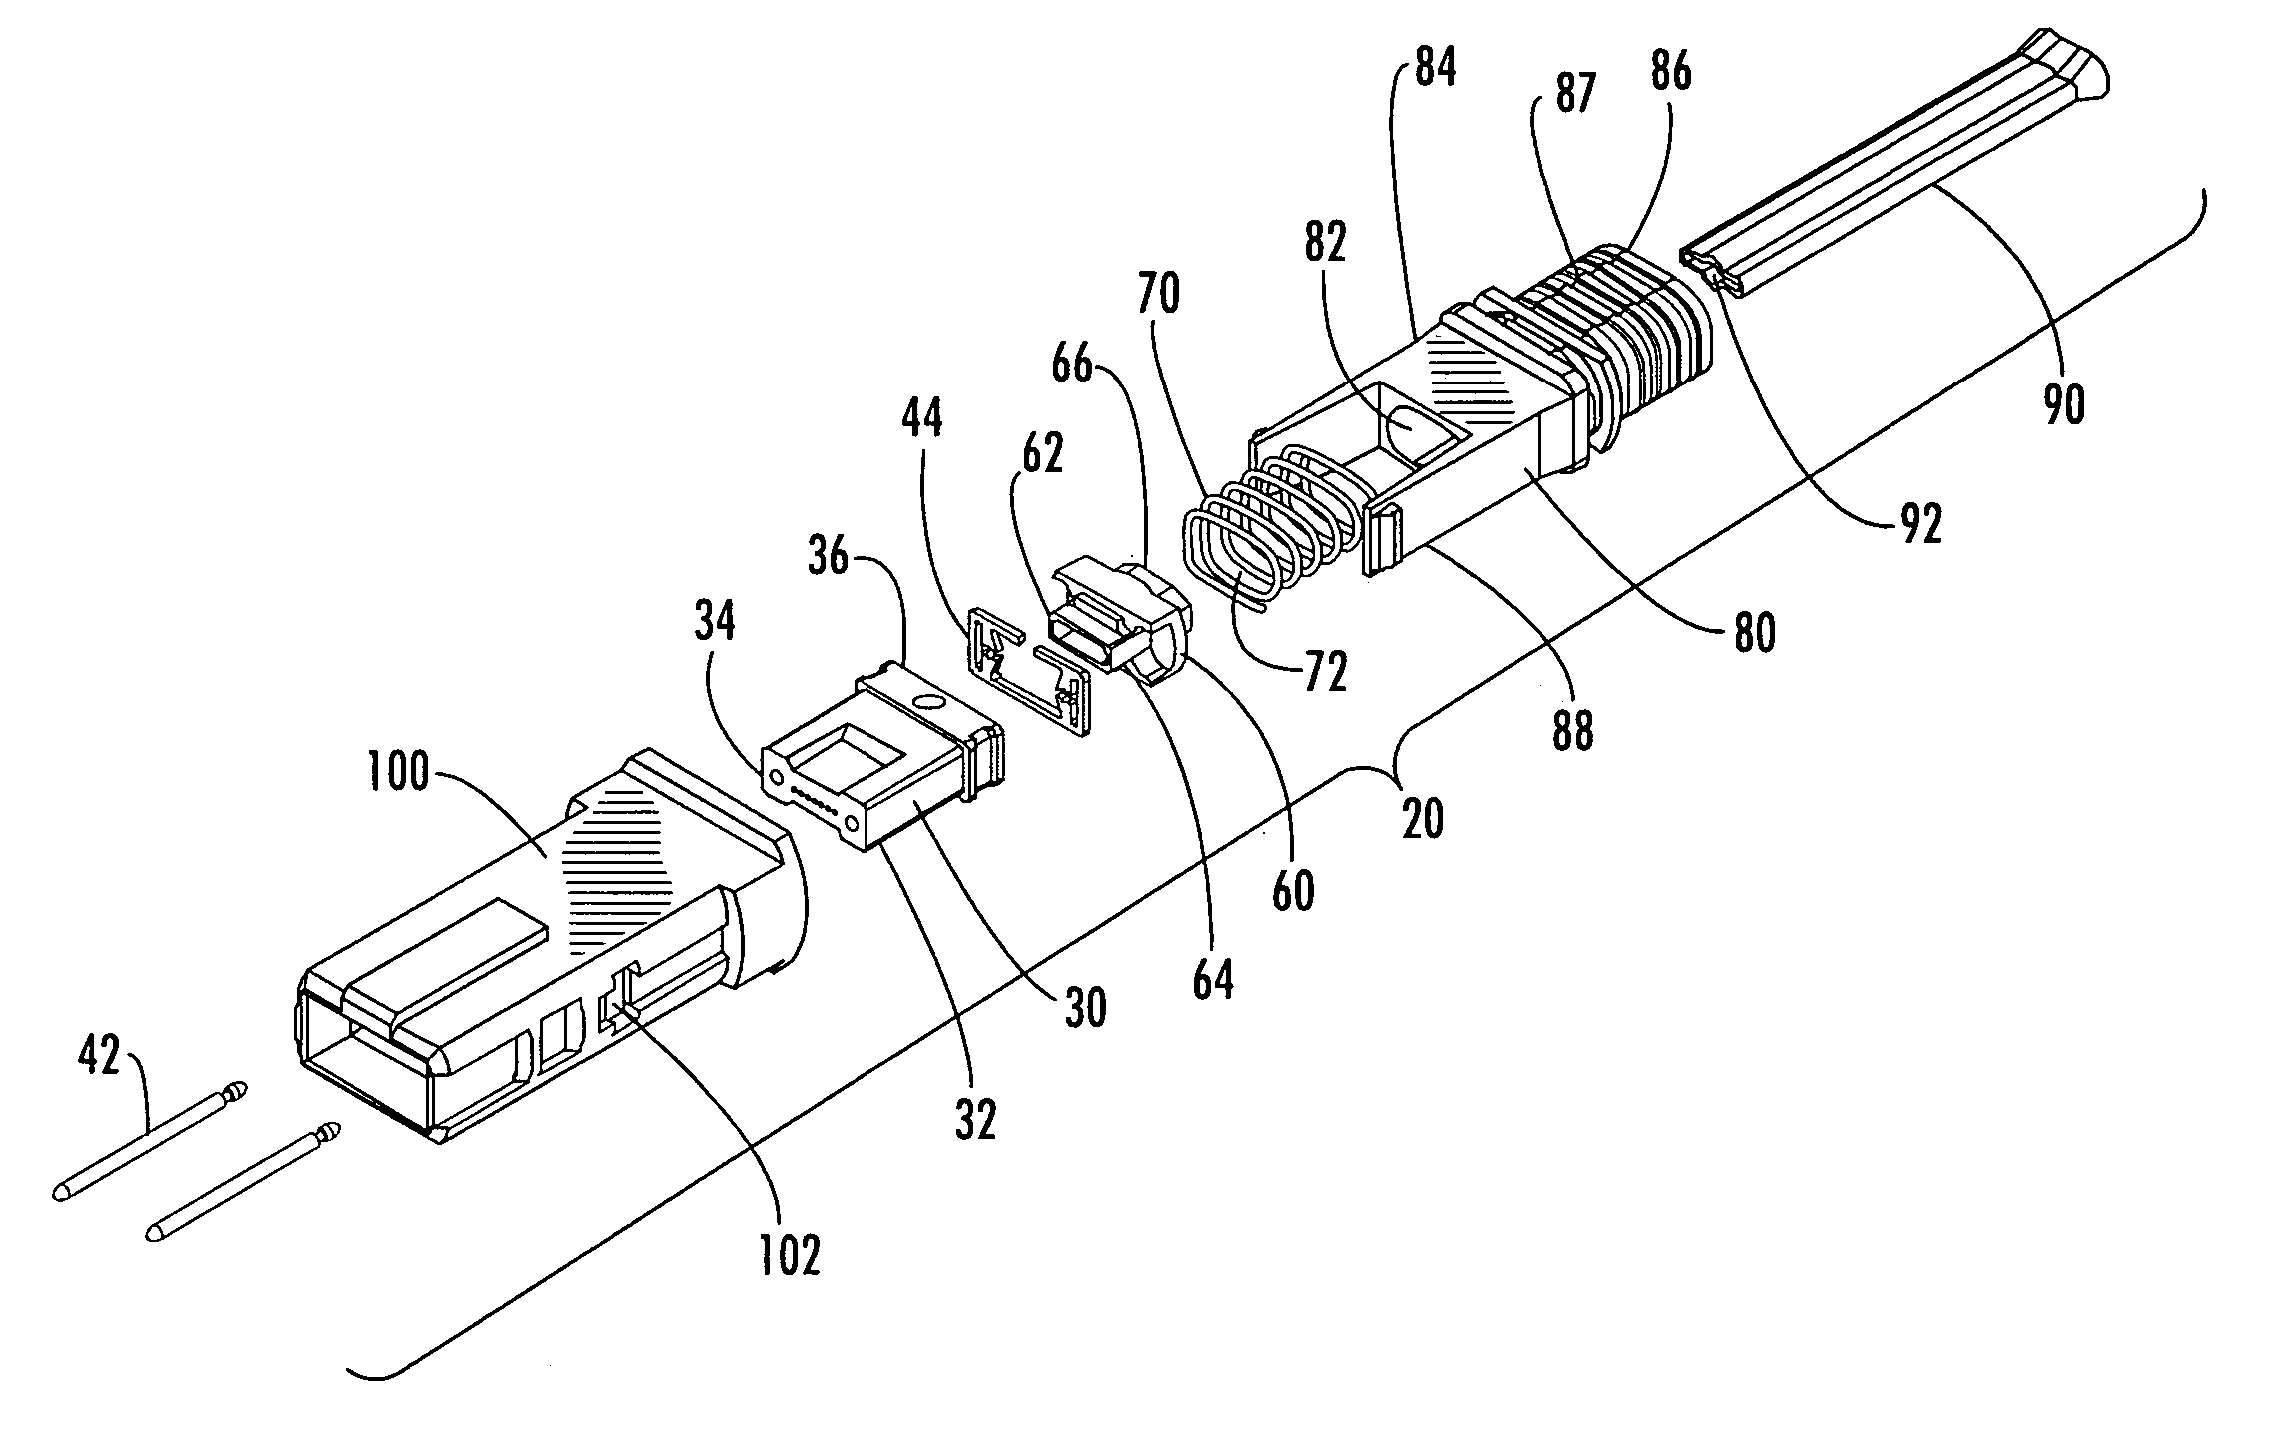 Fiber optic connection for applying axial biasing force to multifiber ferrule